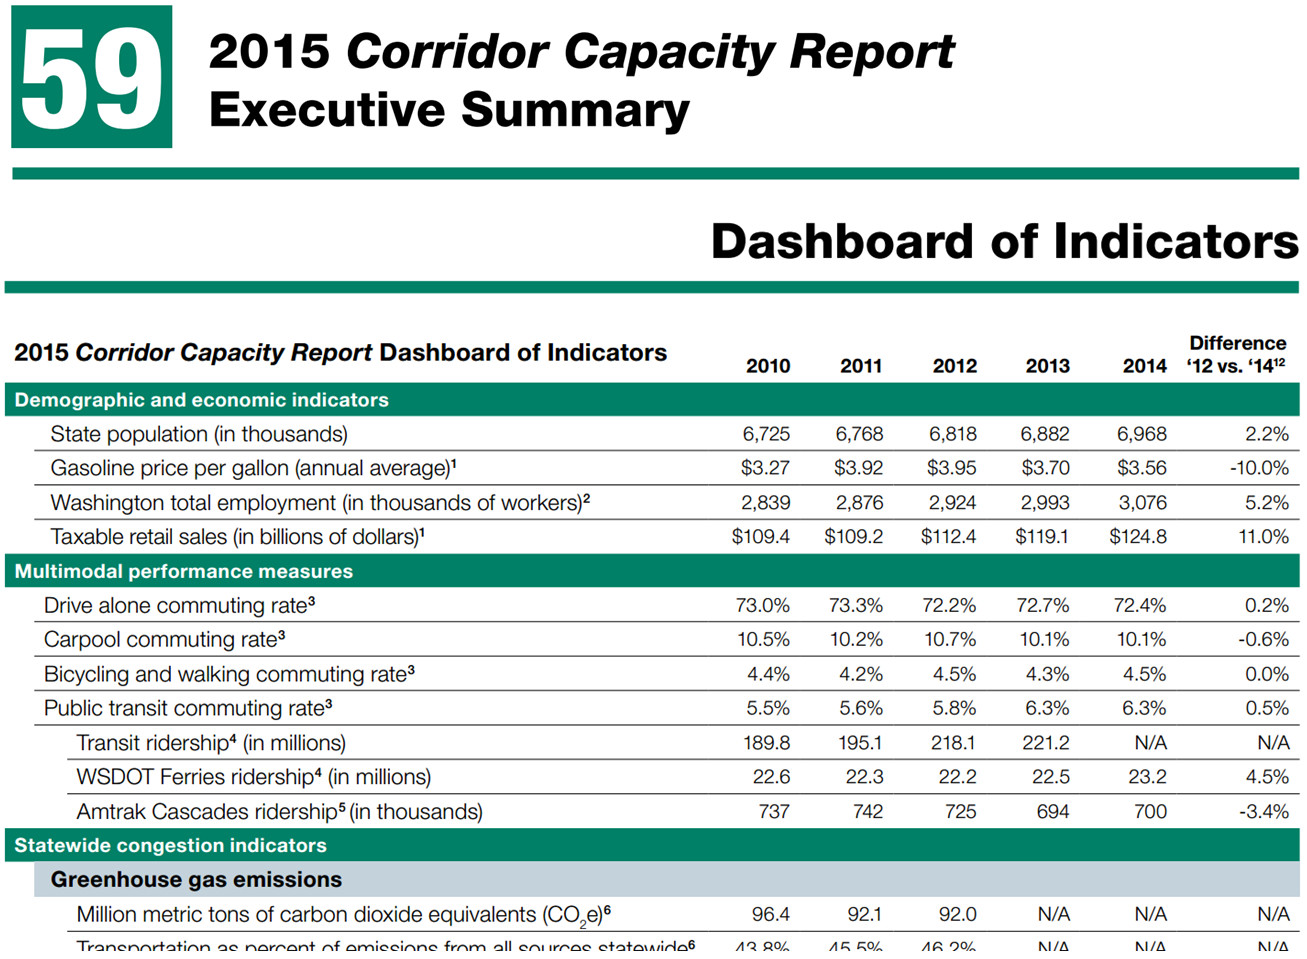 2015 Corridor Capacity Report Executive Summary. Dashboard of Indicators. Indicators are listed with performance for years 2010 through 2014. Measures separated by categories, such as demographic and economic indicators and multimodal performance measures.